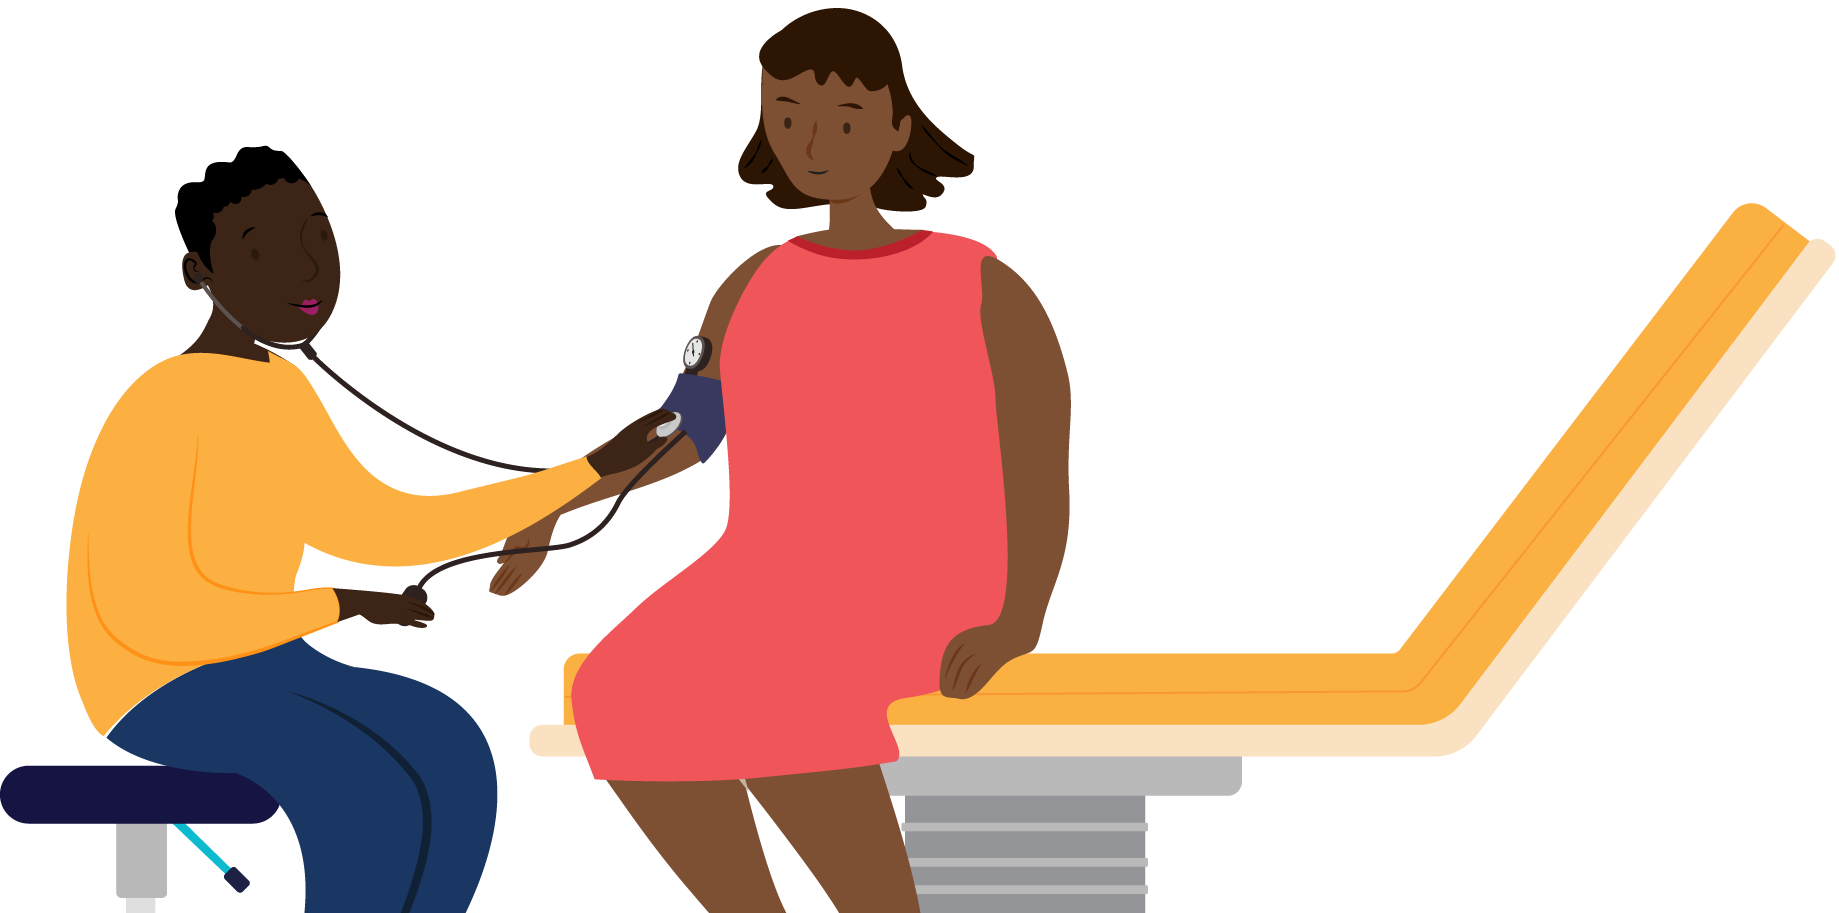 Illustration of a physician taking a patient’s blood pressure reading, while they sit on an exam table